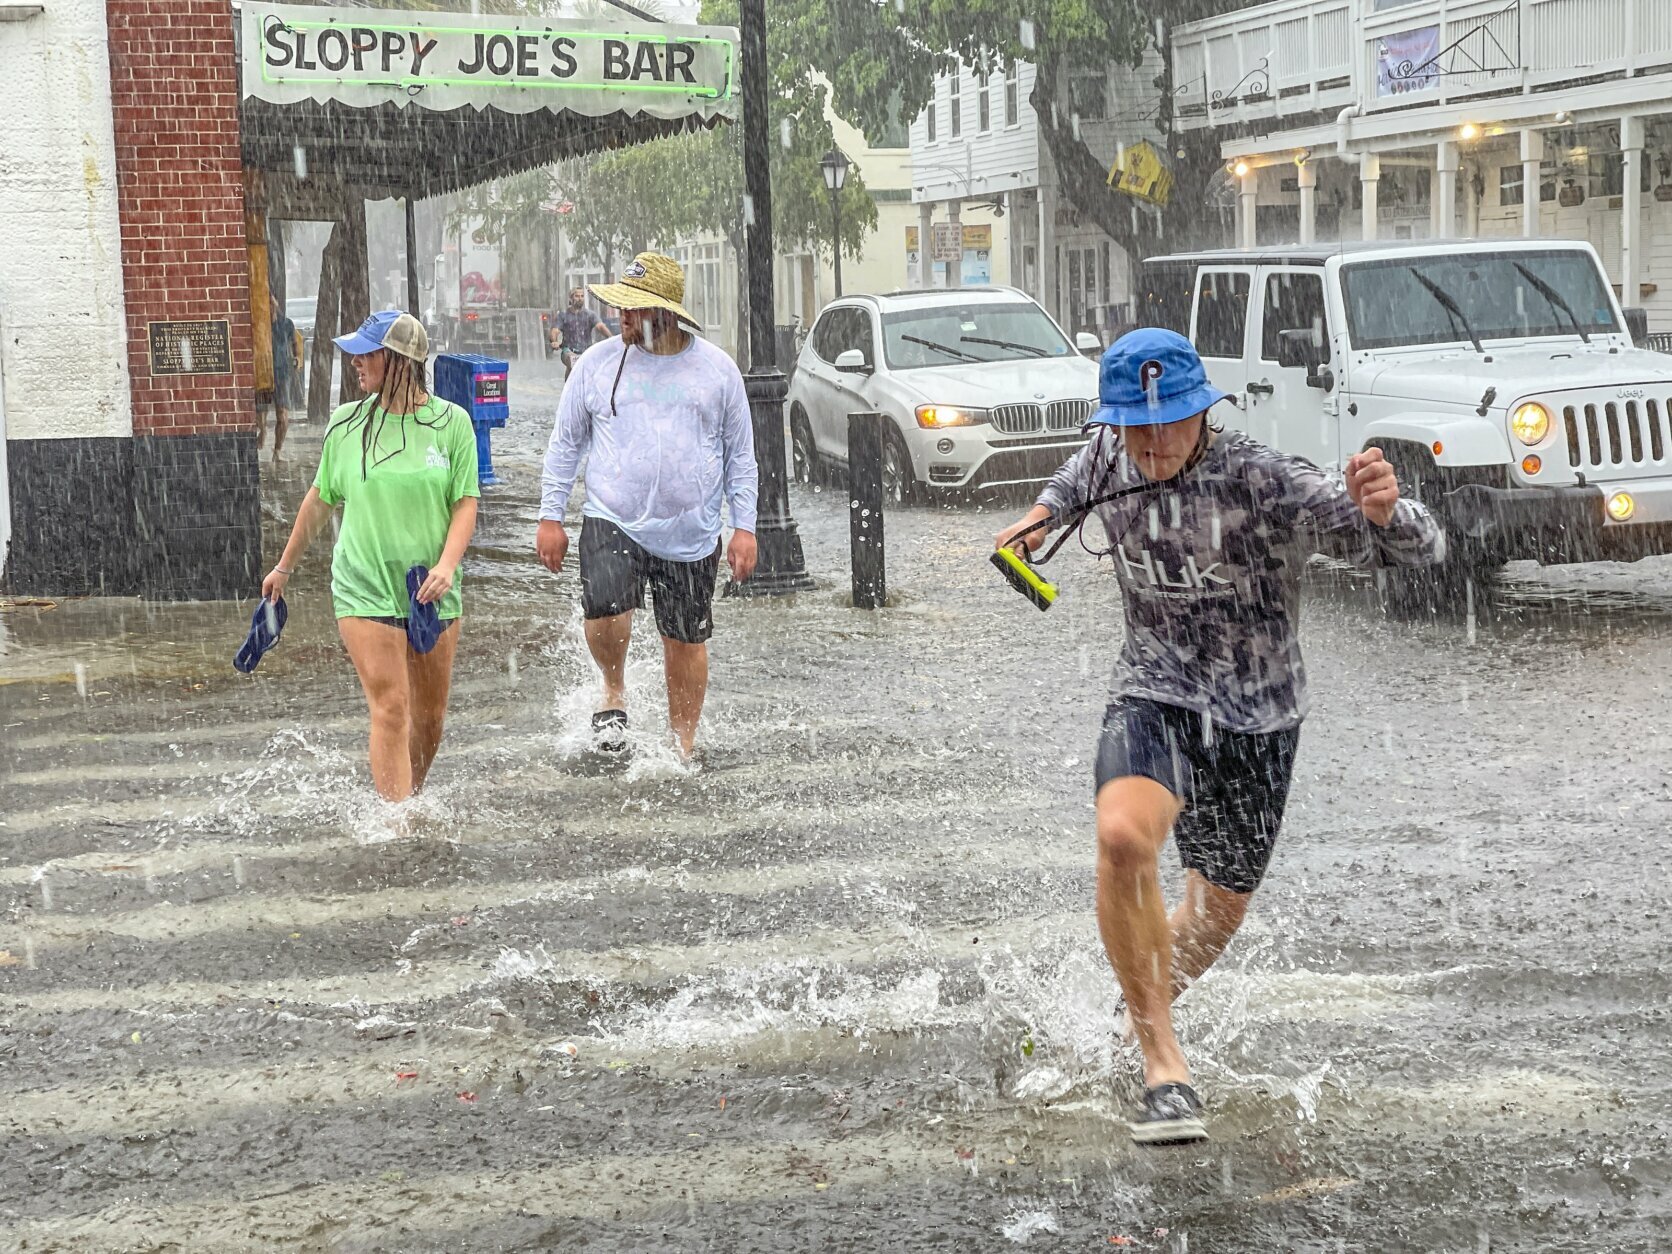 Pedestrians dash across the intersection of Greene and Duval streets as heavy winds and rain associated with Tropical Storm Elsa passes Key West, Fla., on Tuesday, July 6, 2021. The weather was getting worse in southern Florida on Tuesday morning as Tropical Storm Elsa began lashing the Florida Keys, complicating the search for survivors in the condo collapse and prompting a hurricane watch for the peninsula's upper Gulf Coast. (Rob O'Neal/The Key West Citizen via AP)